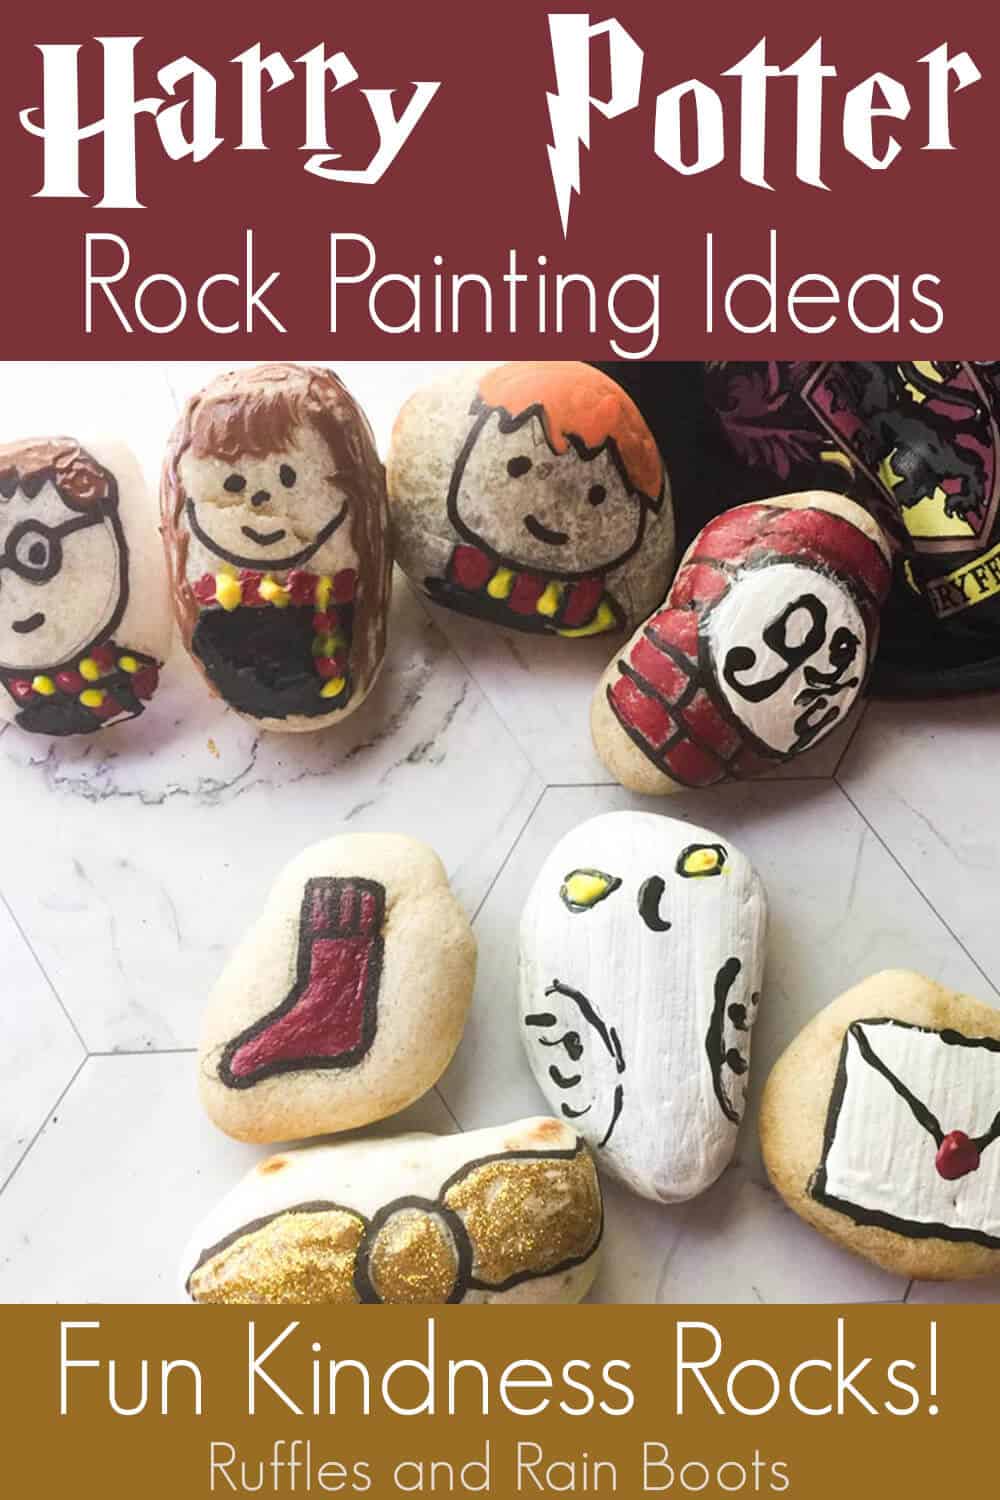 harry potter painted rock ideas on a white background with text which reads harry potter rock painting ideas fun kindness rocks!